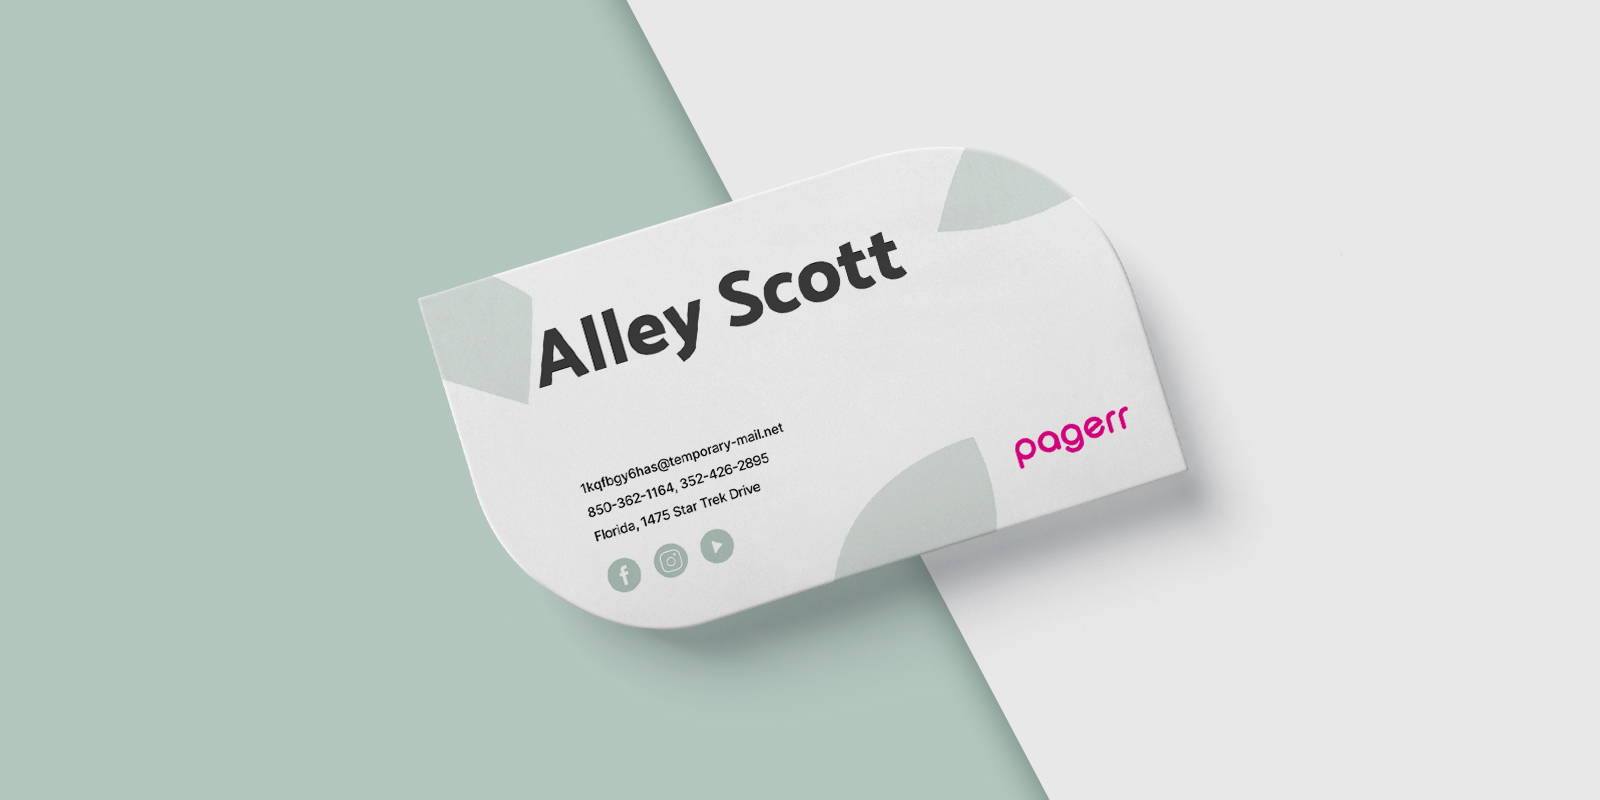 Special shape business cards in Bucharest - Print with Pagerr